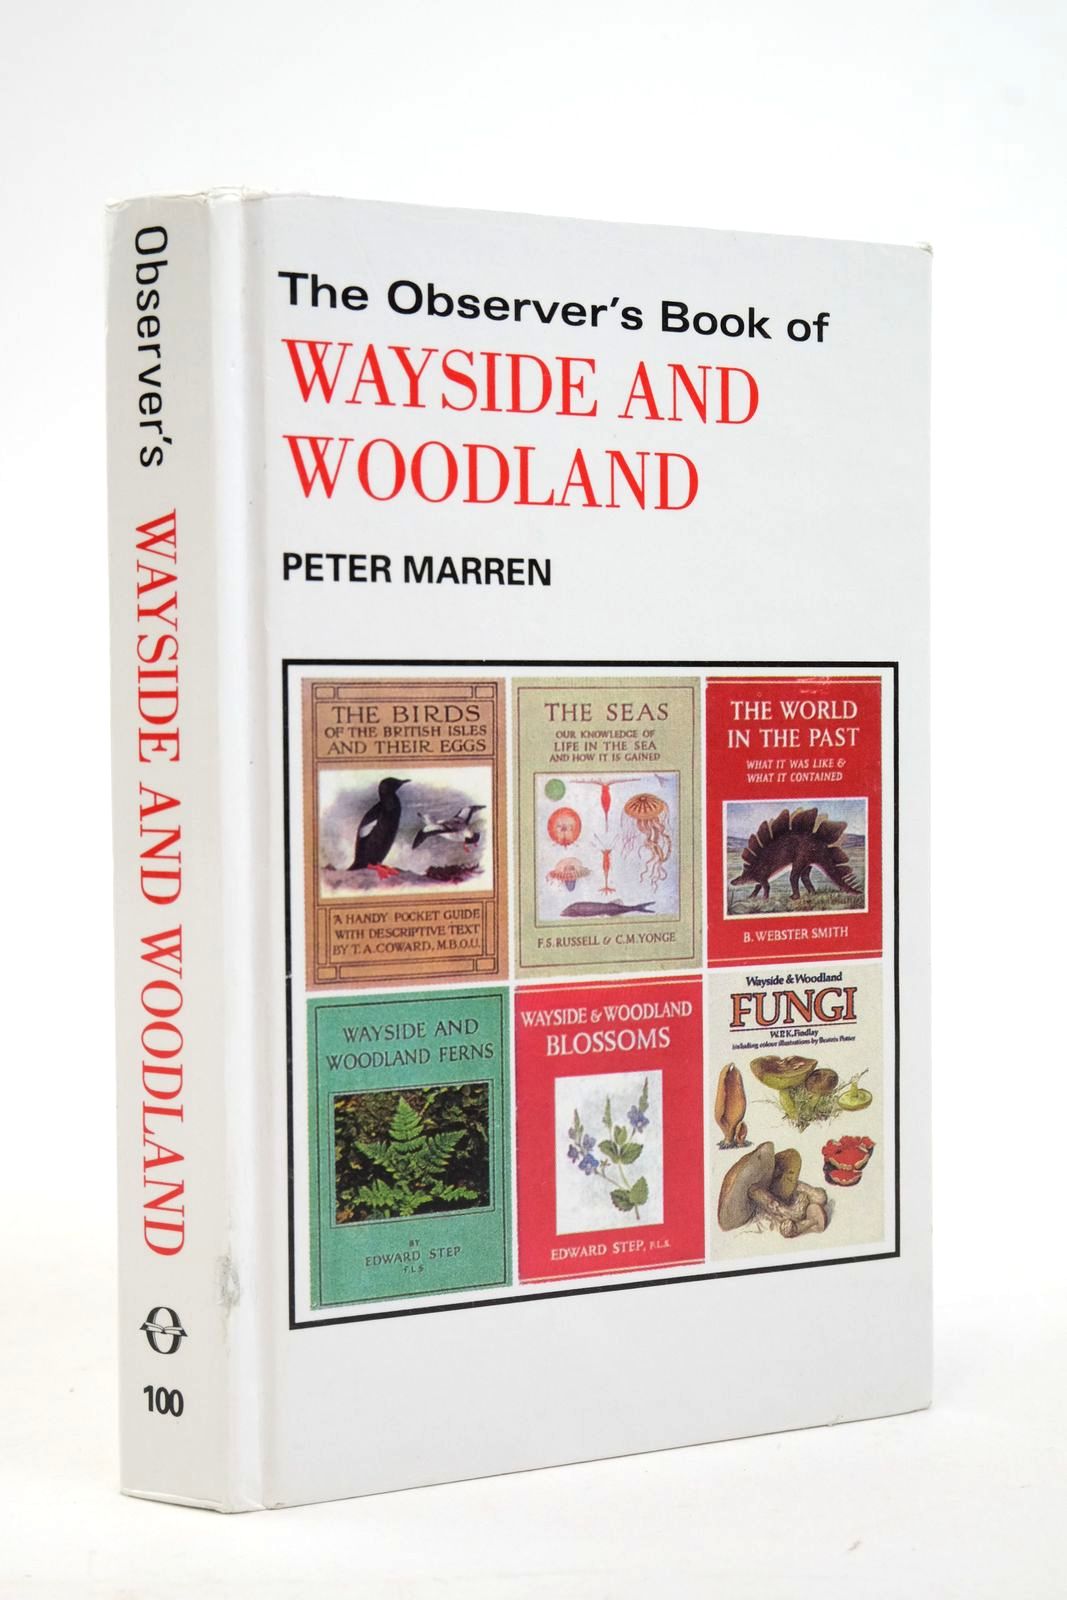 Photo of THE OBSERVER'S BOOK OF WAYSIDE AND WOODLAND written by Marren, Peter illustrated by Burgess, Mick published by Peregrine (STOCK CODE: 2136900)  for sale by Stella & Rose's Books